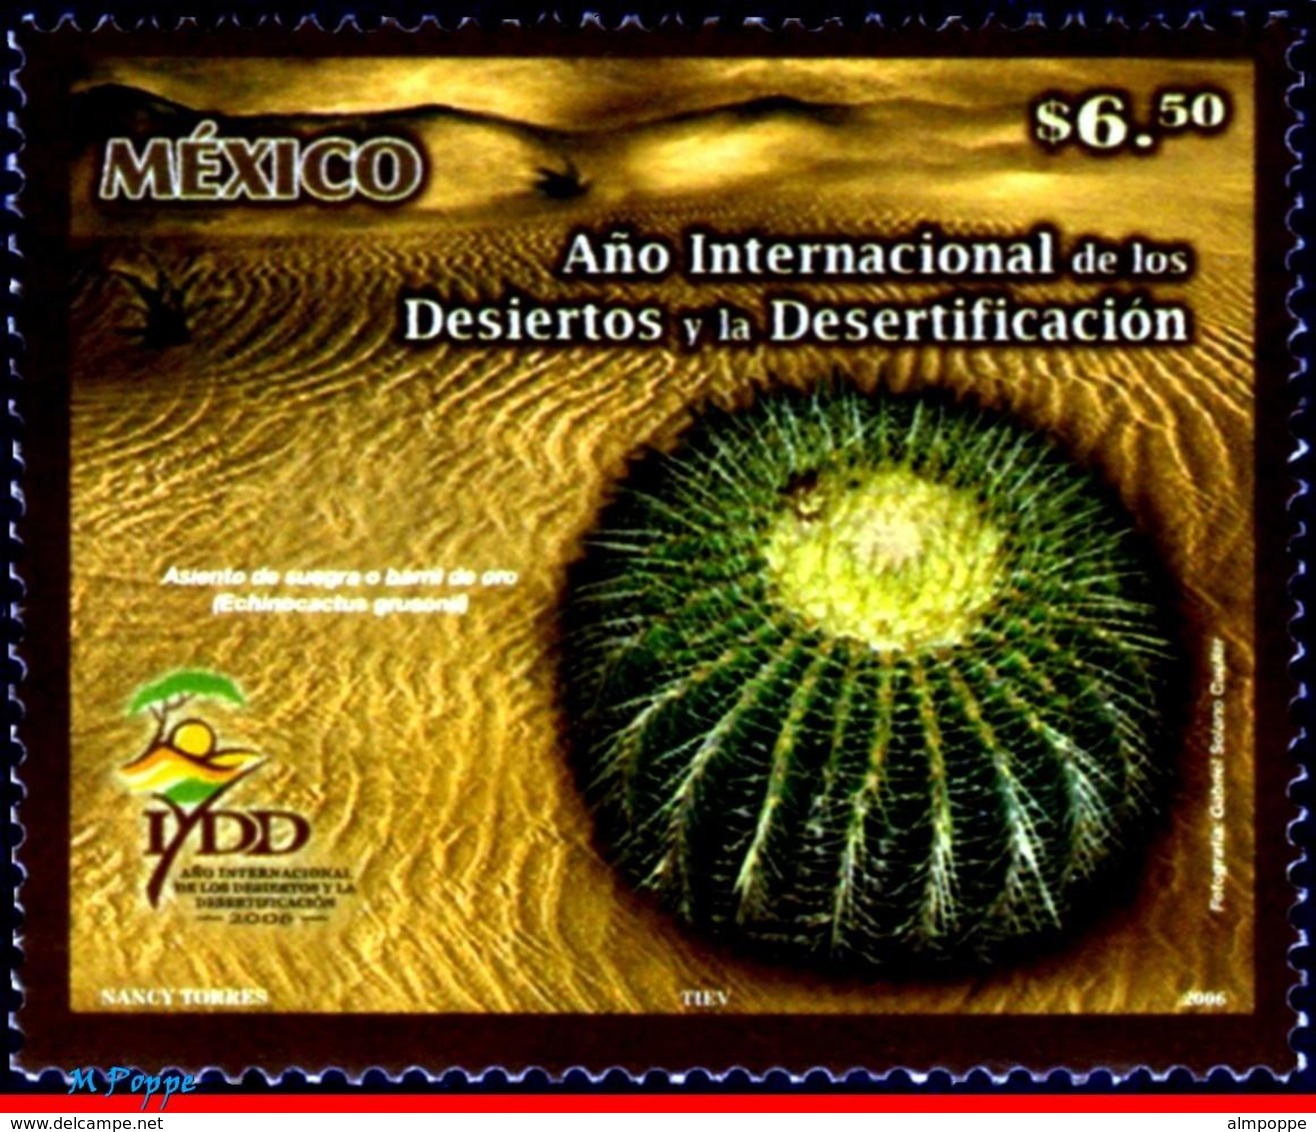 Ref. MX-2523 MEXICO 2006 FLOWERS, PLANTS, INTL.YEAR OF DESERTS AND, DESERTIFICATION, CACTUS, MNH 1V Sc# 2523 - Mexique